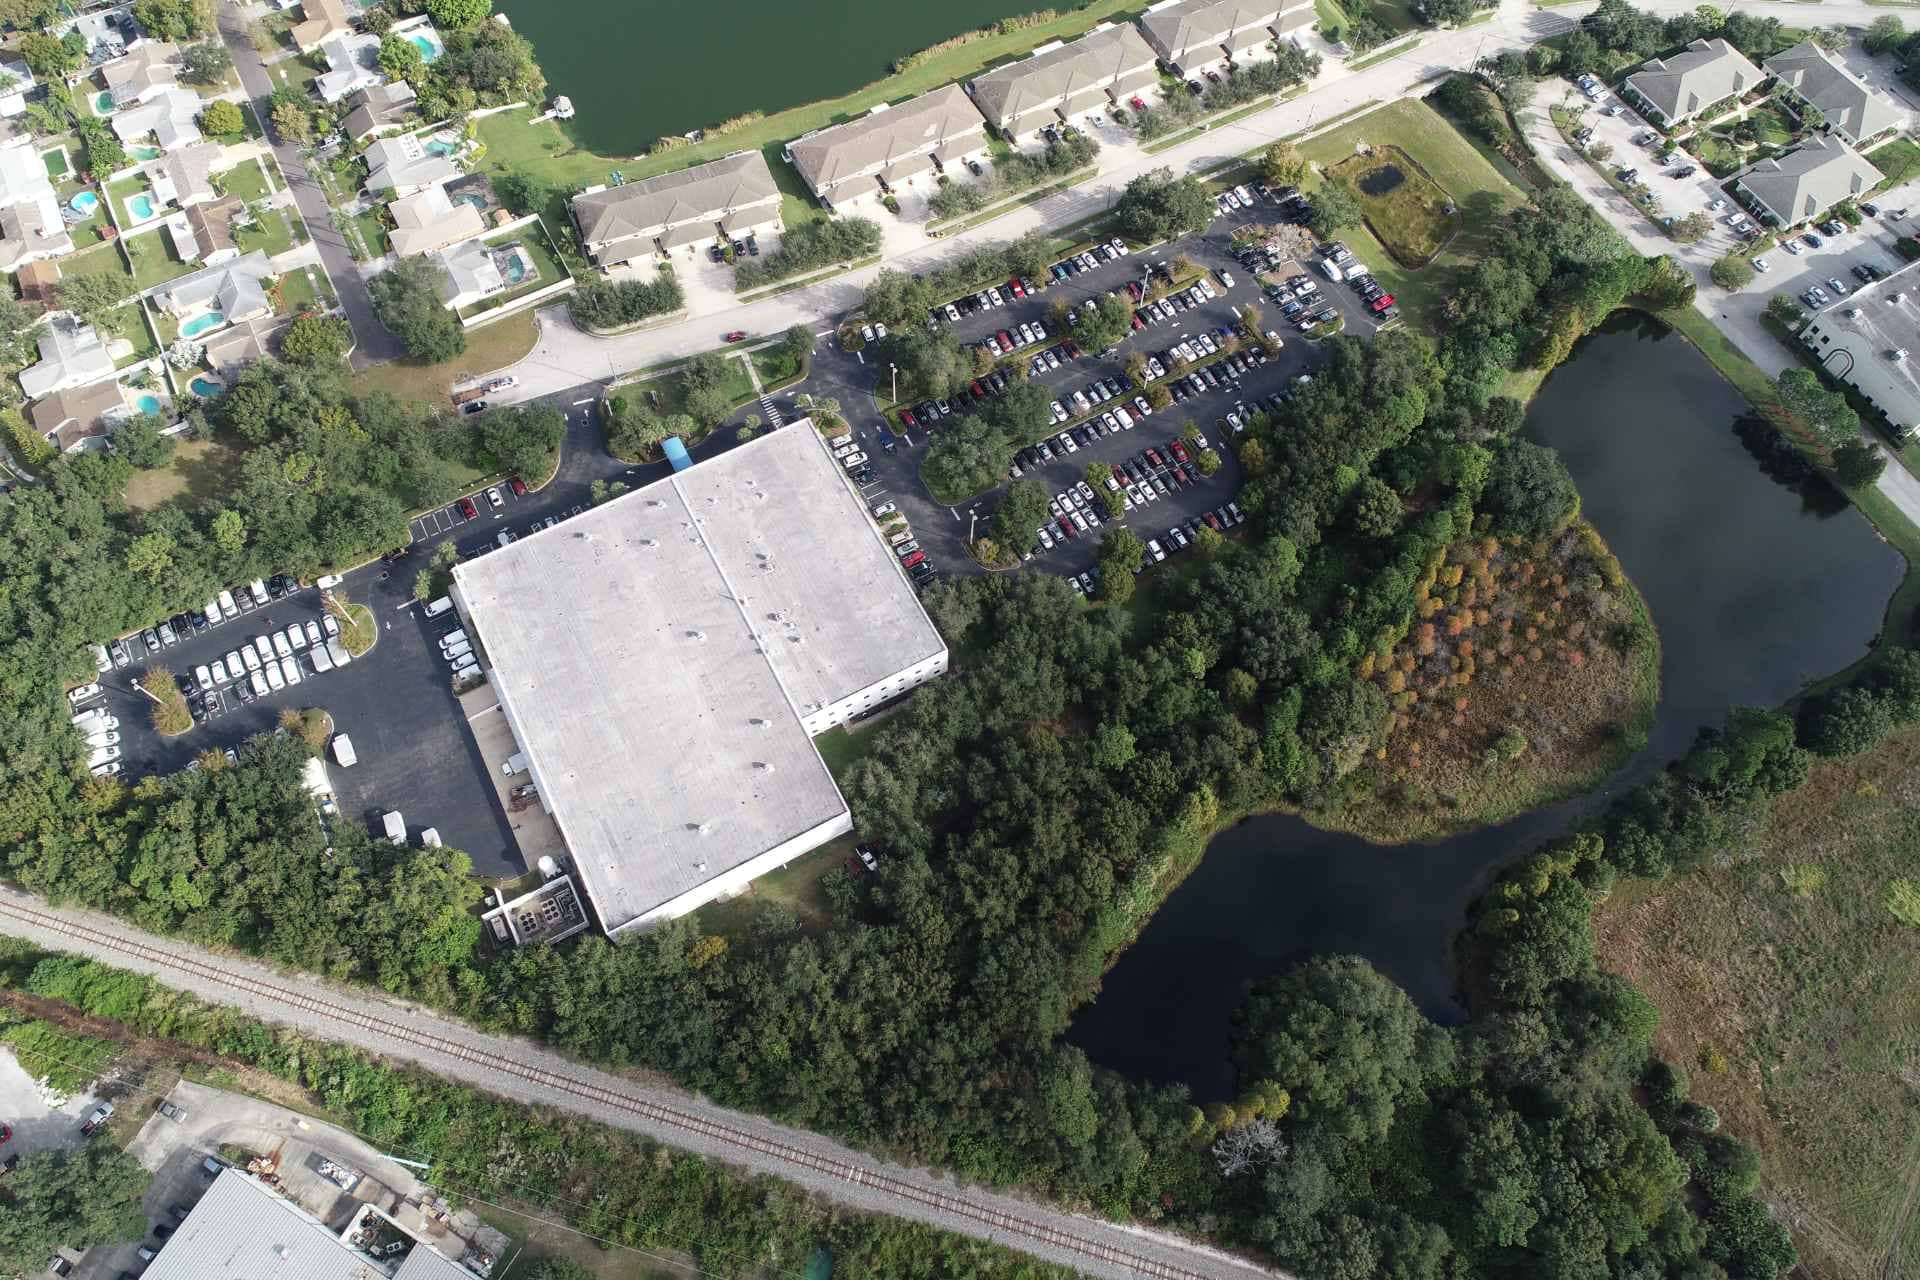 BayCare parking lots and overhead view